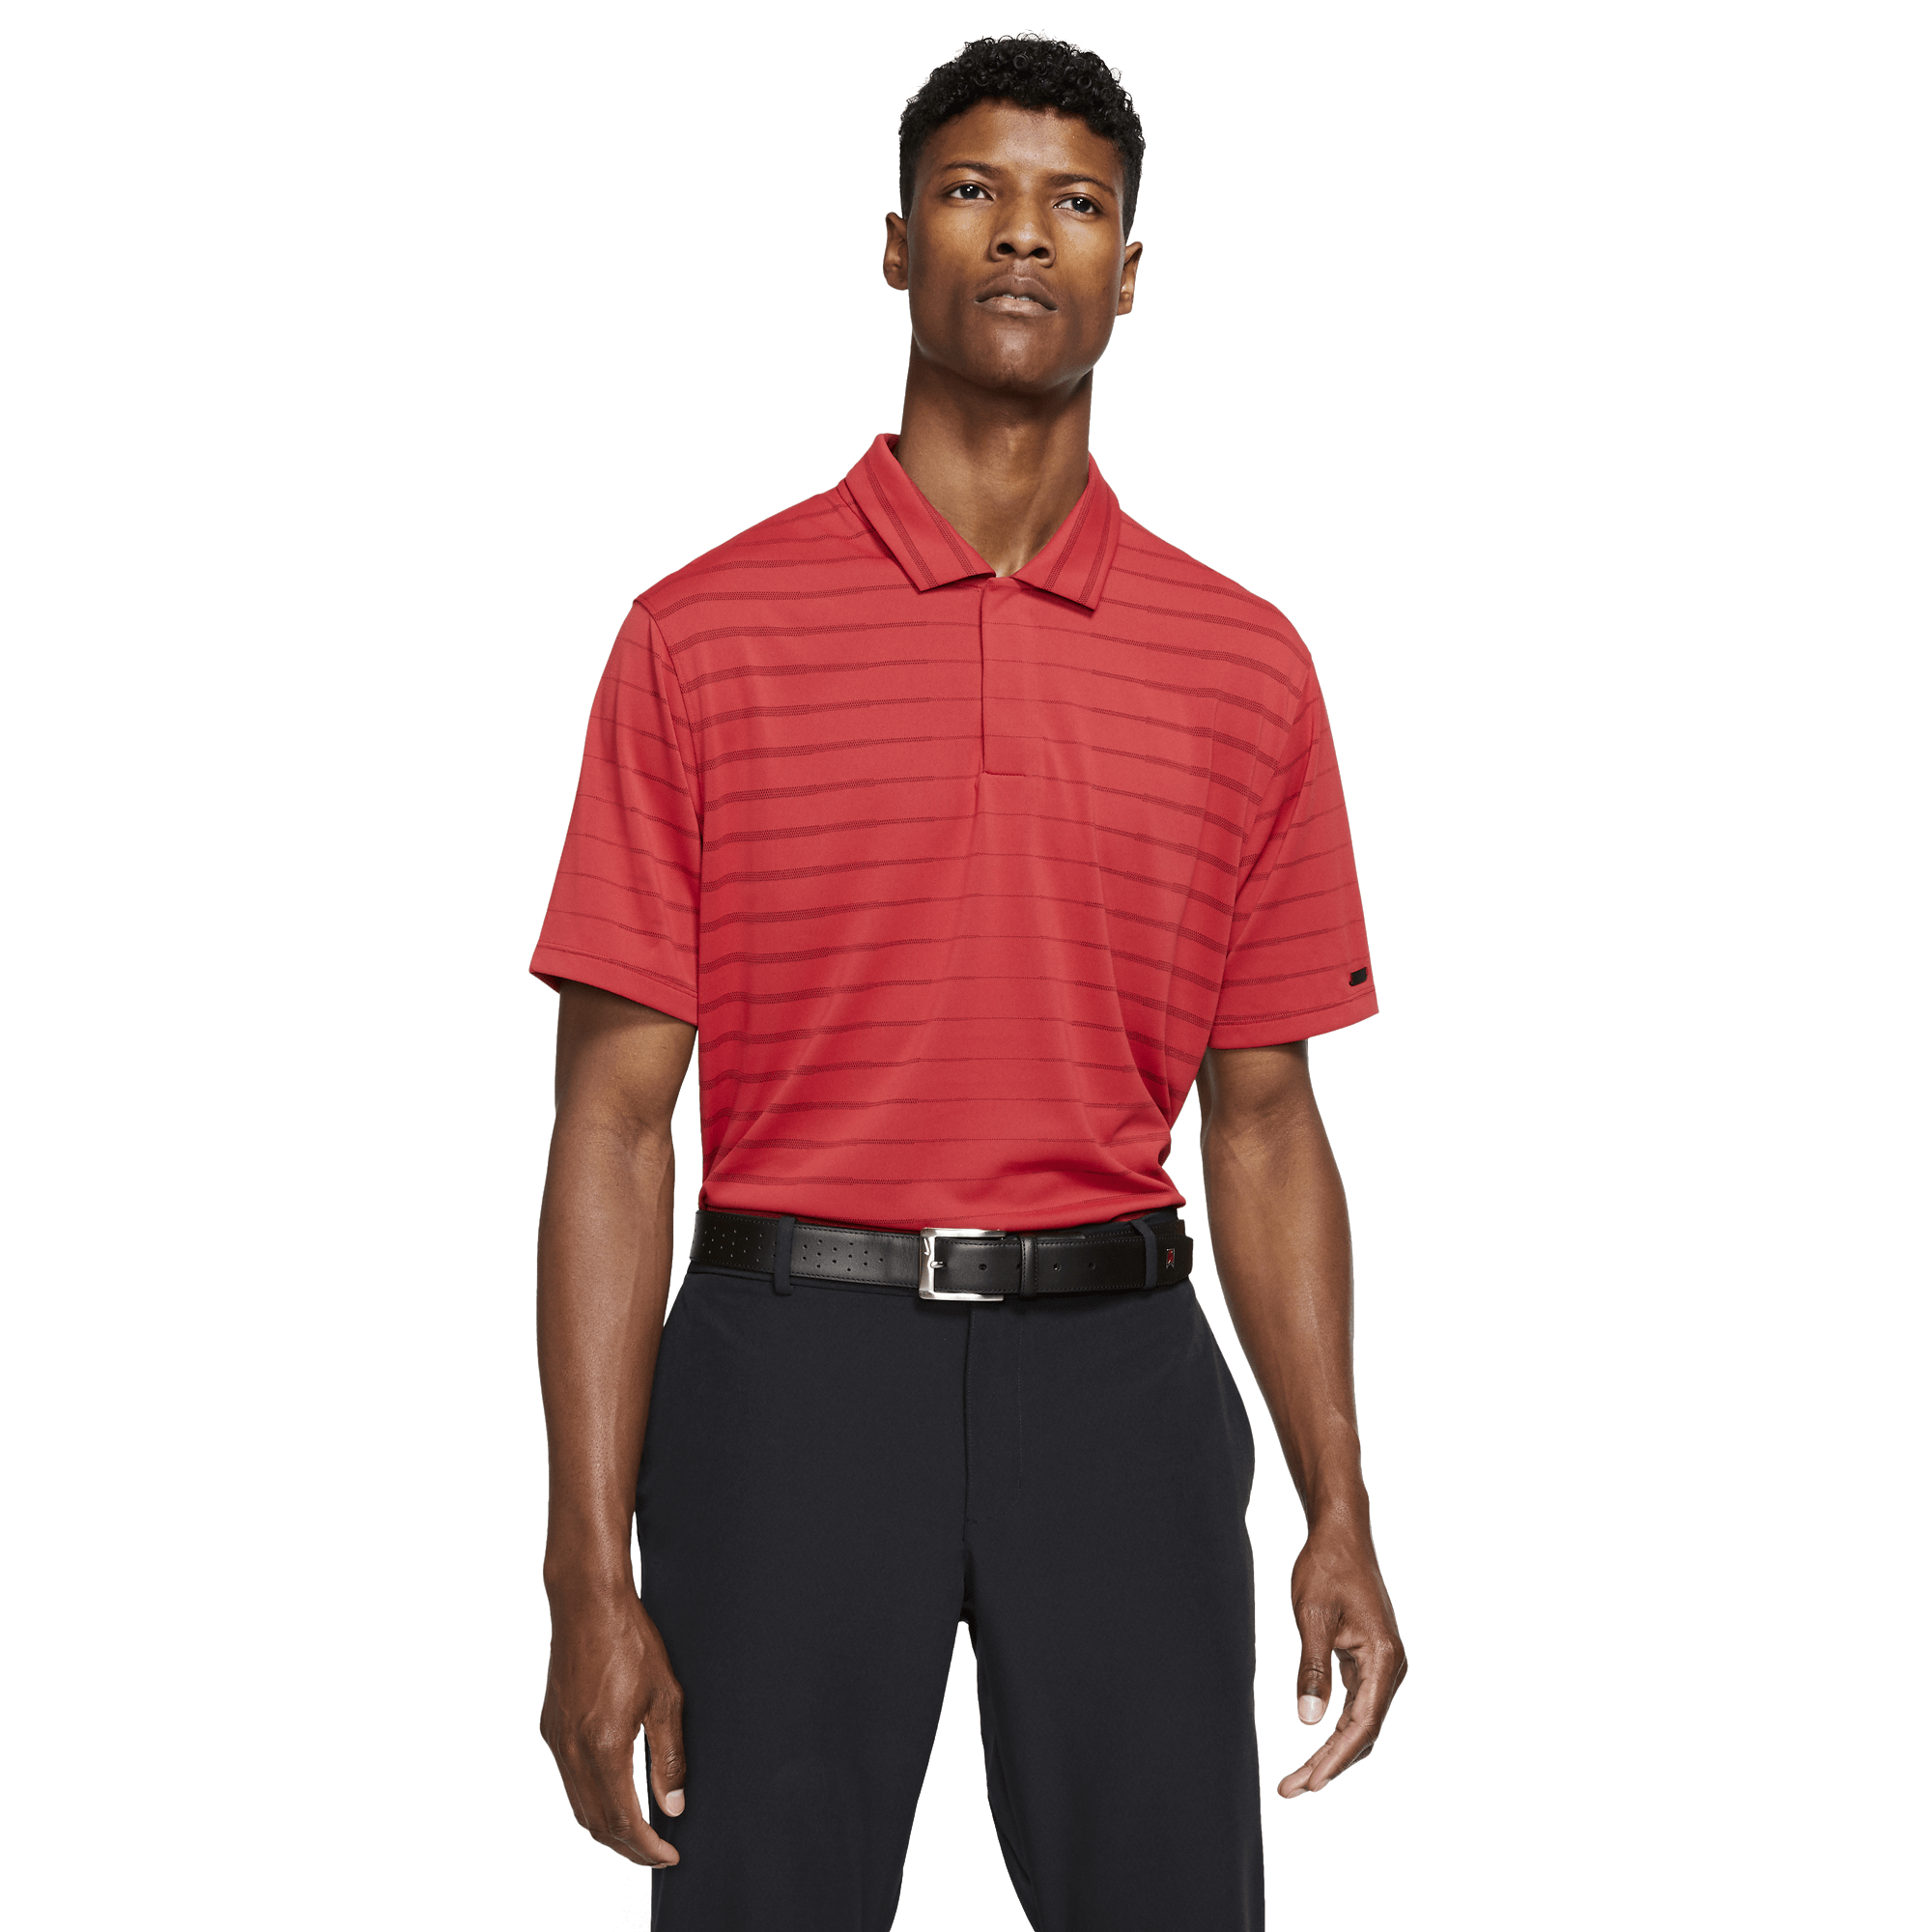 polo nike tiger woods